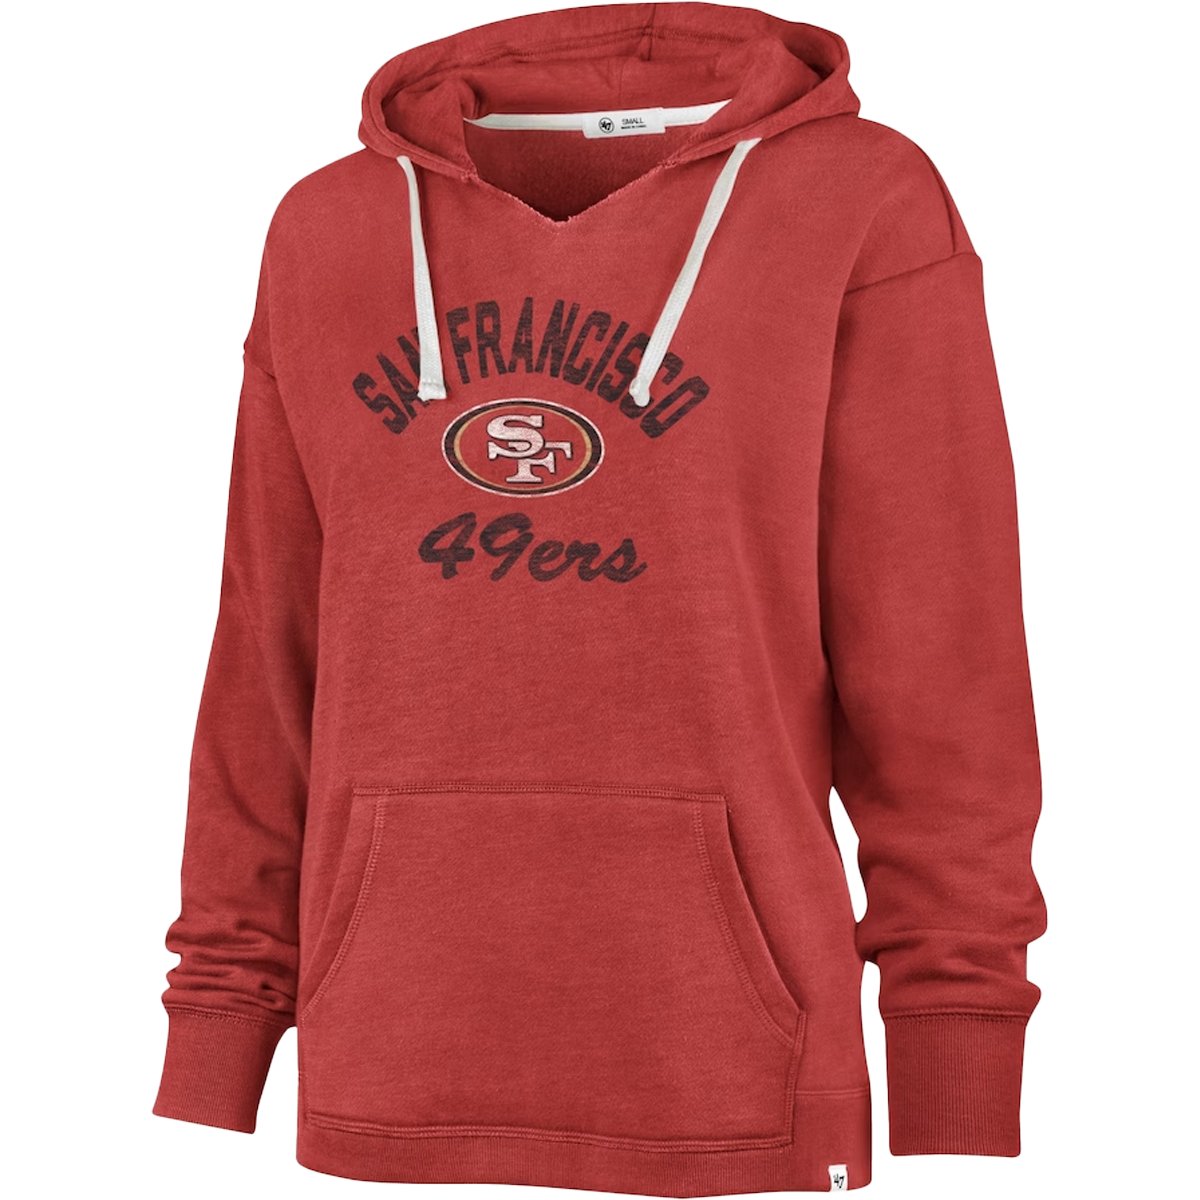 Women's 49ers Wrapped Up Kennedy Hood alternate view